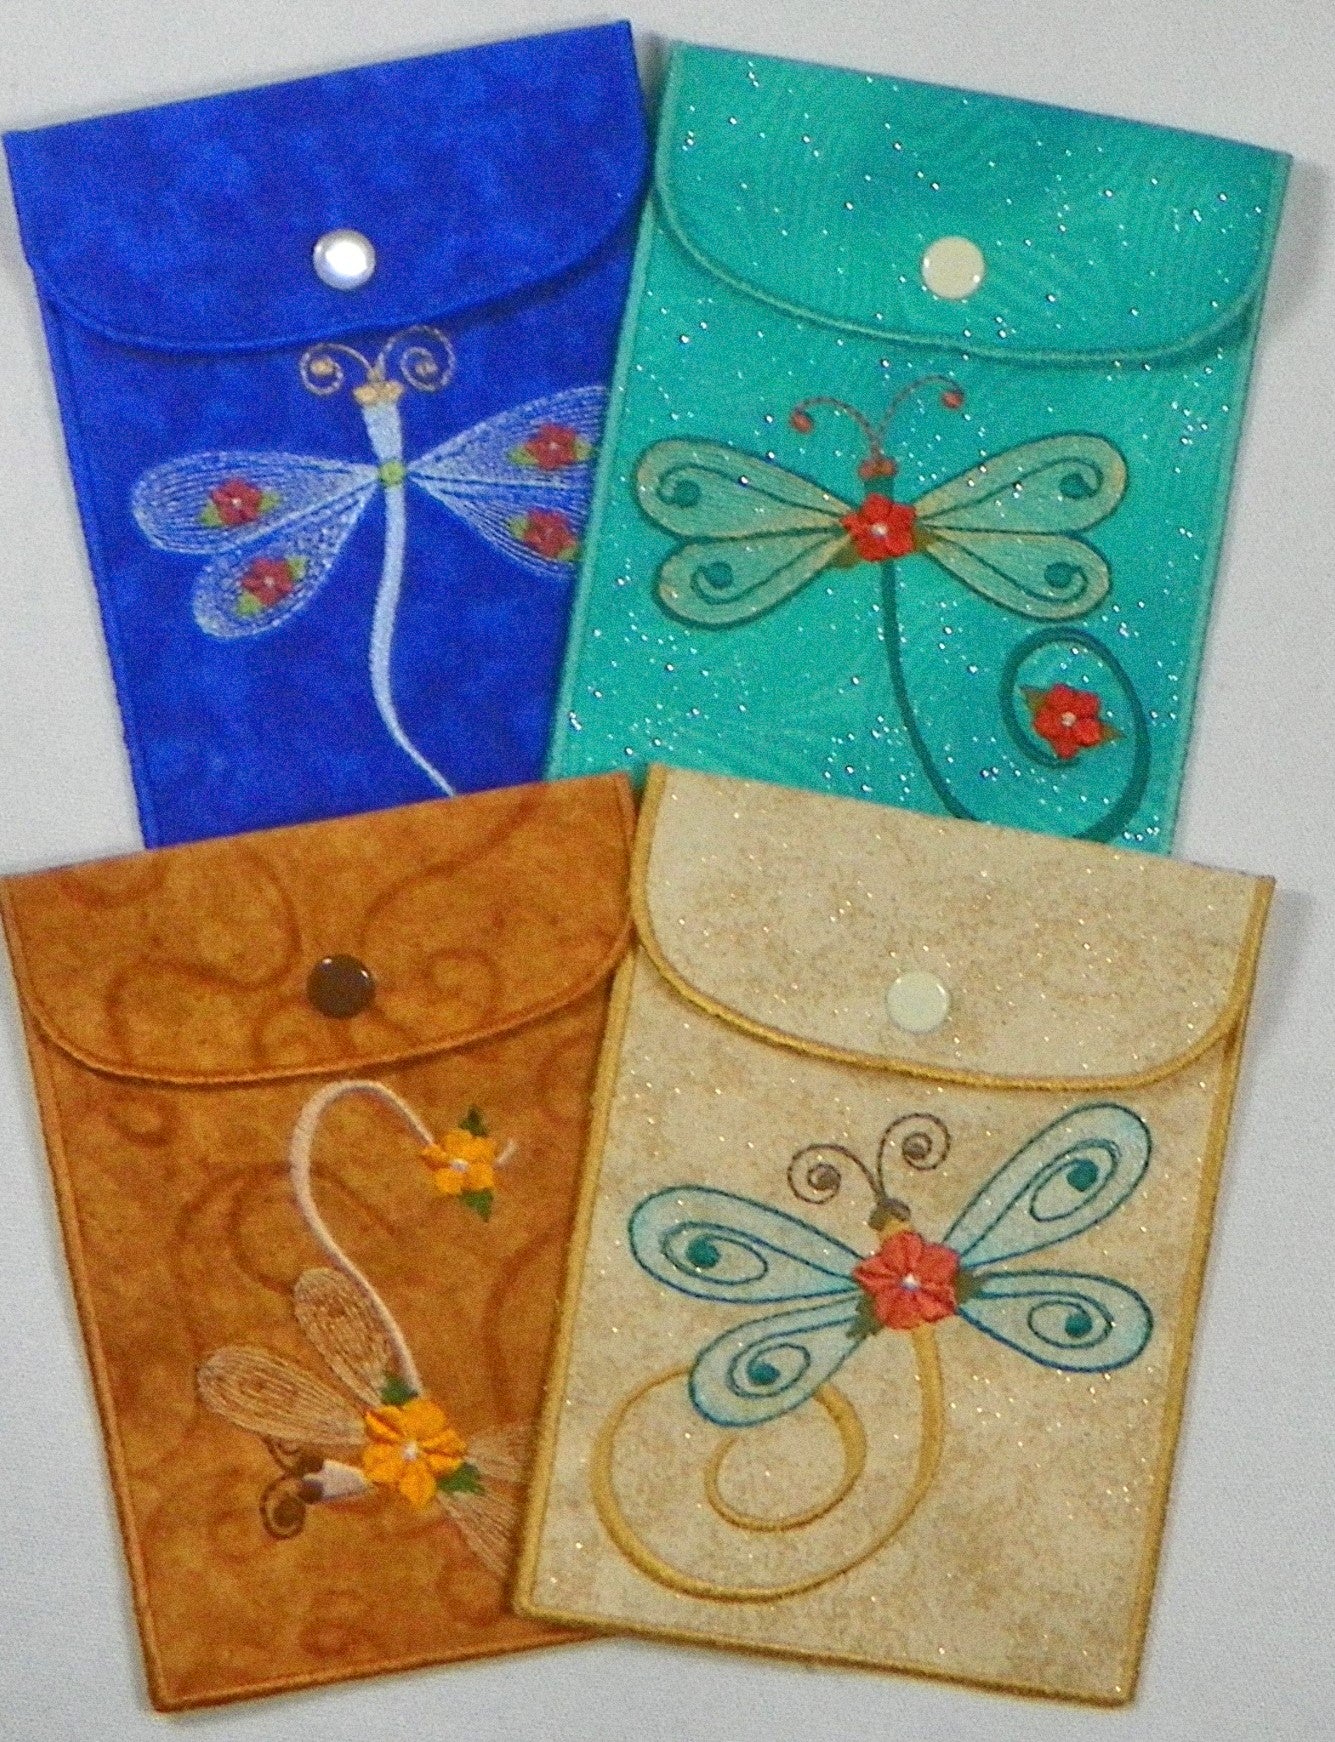 Dragonfly Pouch Project  [8"x10" Hoop] # 10315